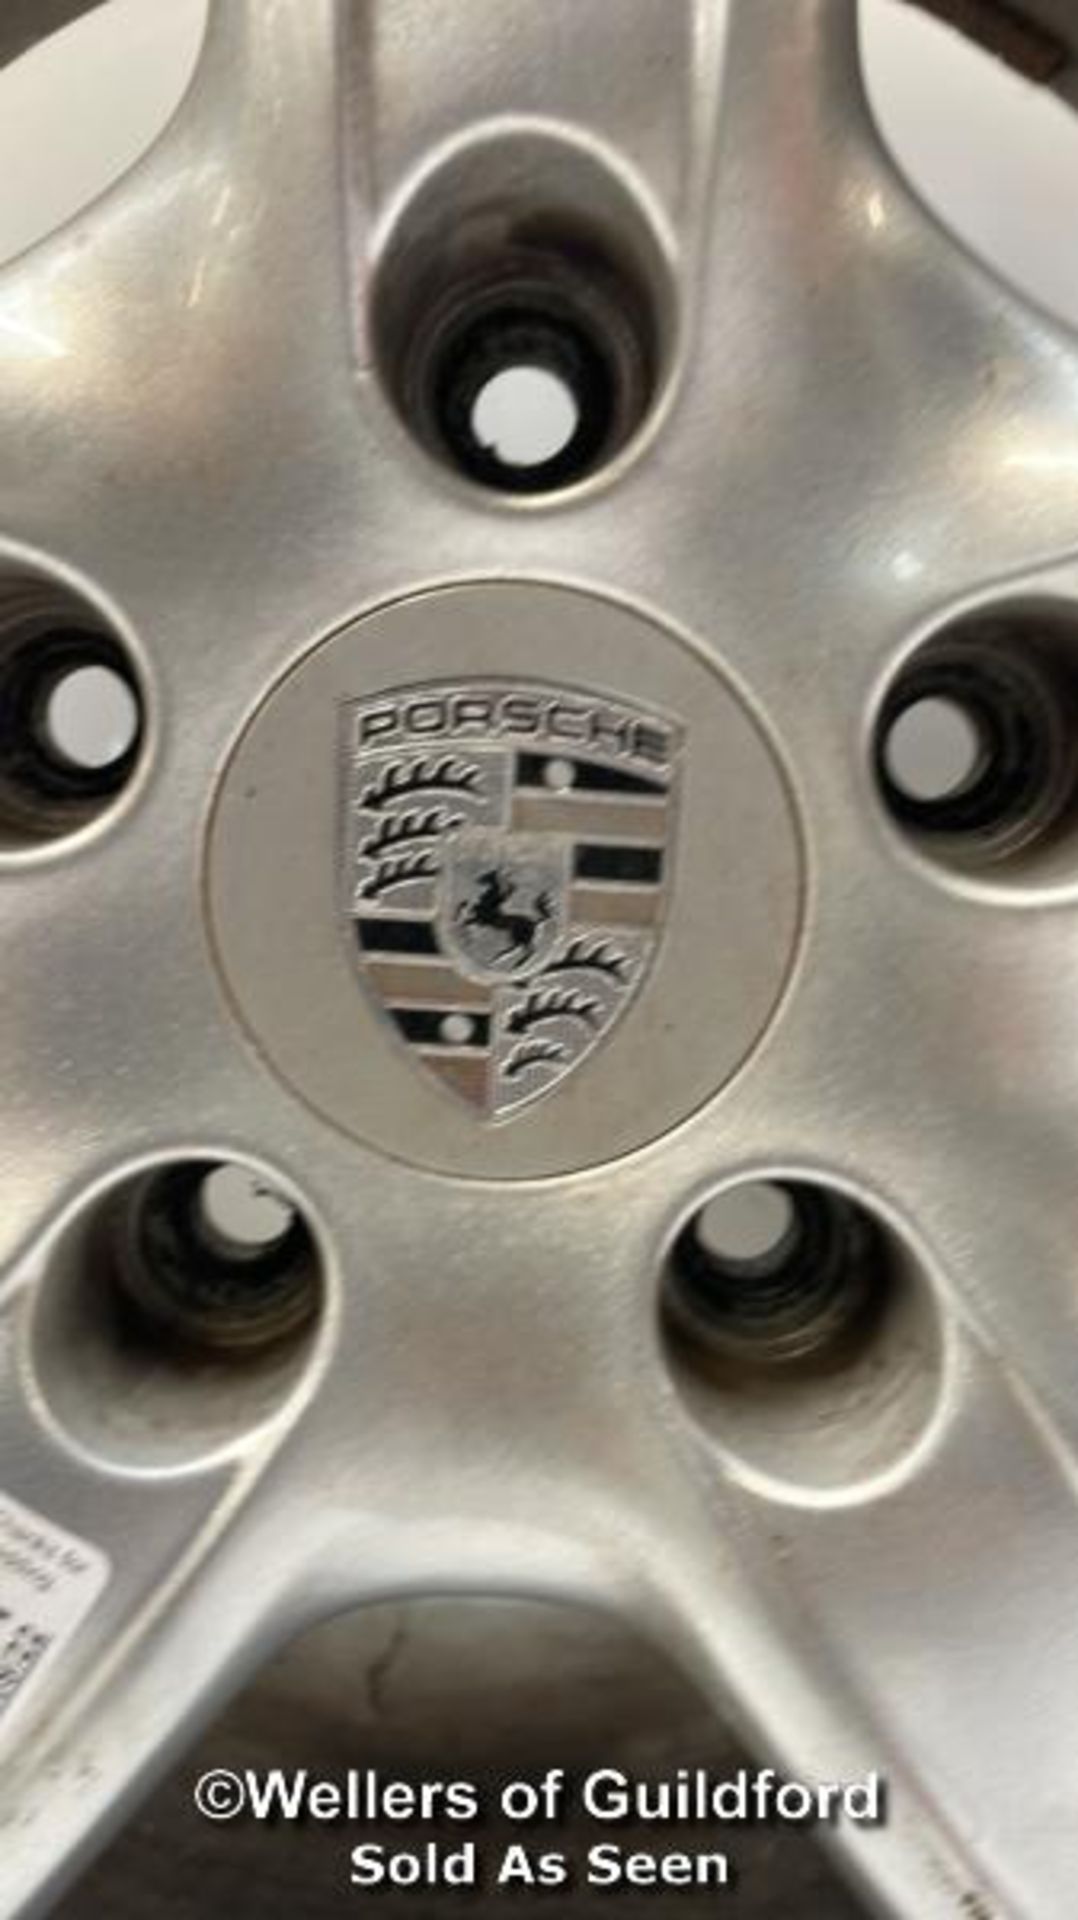 *PORSCHE BOXSTER 987S 18" FRONT ALLOY 98736213800 18X8J ET57 LOBSTER CLAW - Image 2 of 5